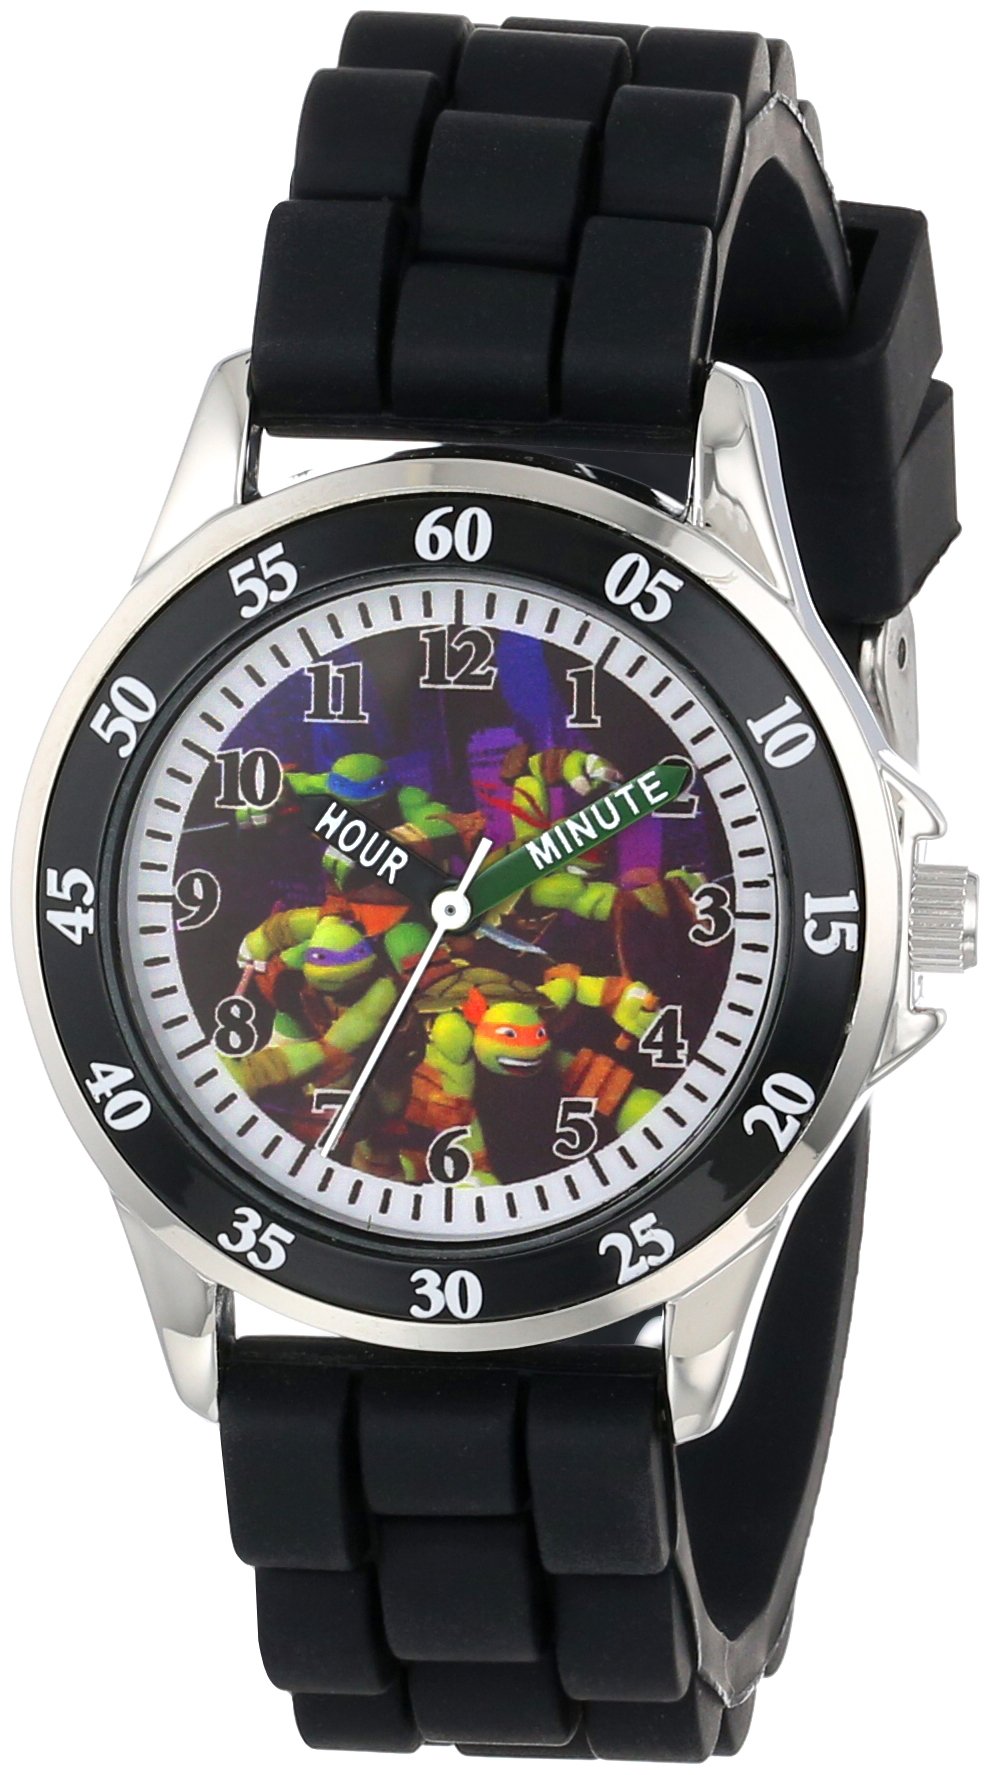 Accutime Ninja Turtles Kids' Analog Watch with Silver-Tone Casing, Black Bezel, Black Strap - Official TMNT Characters on The Dial, Time-Teacher Watch, Safe for Children - Model: TMN9013